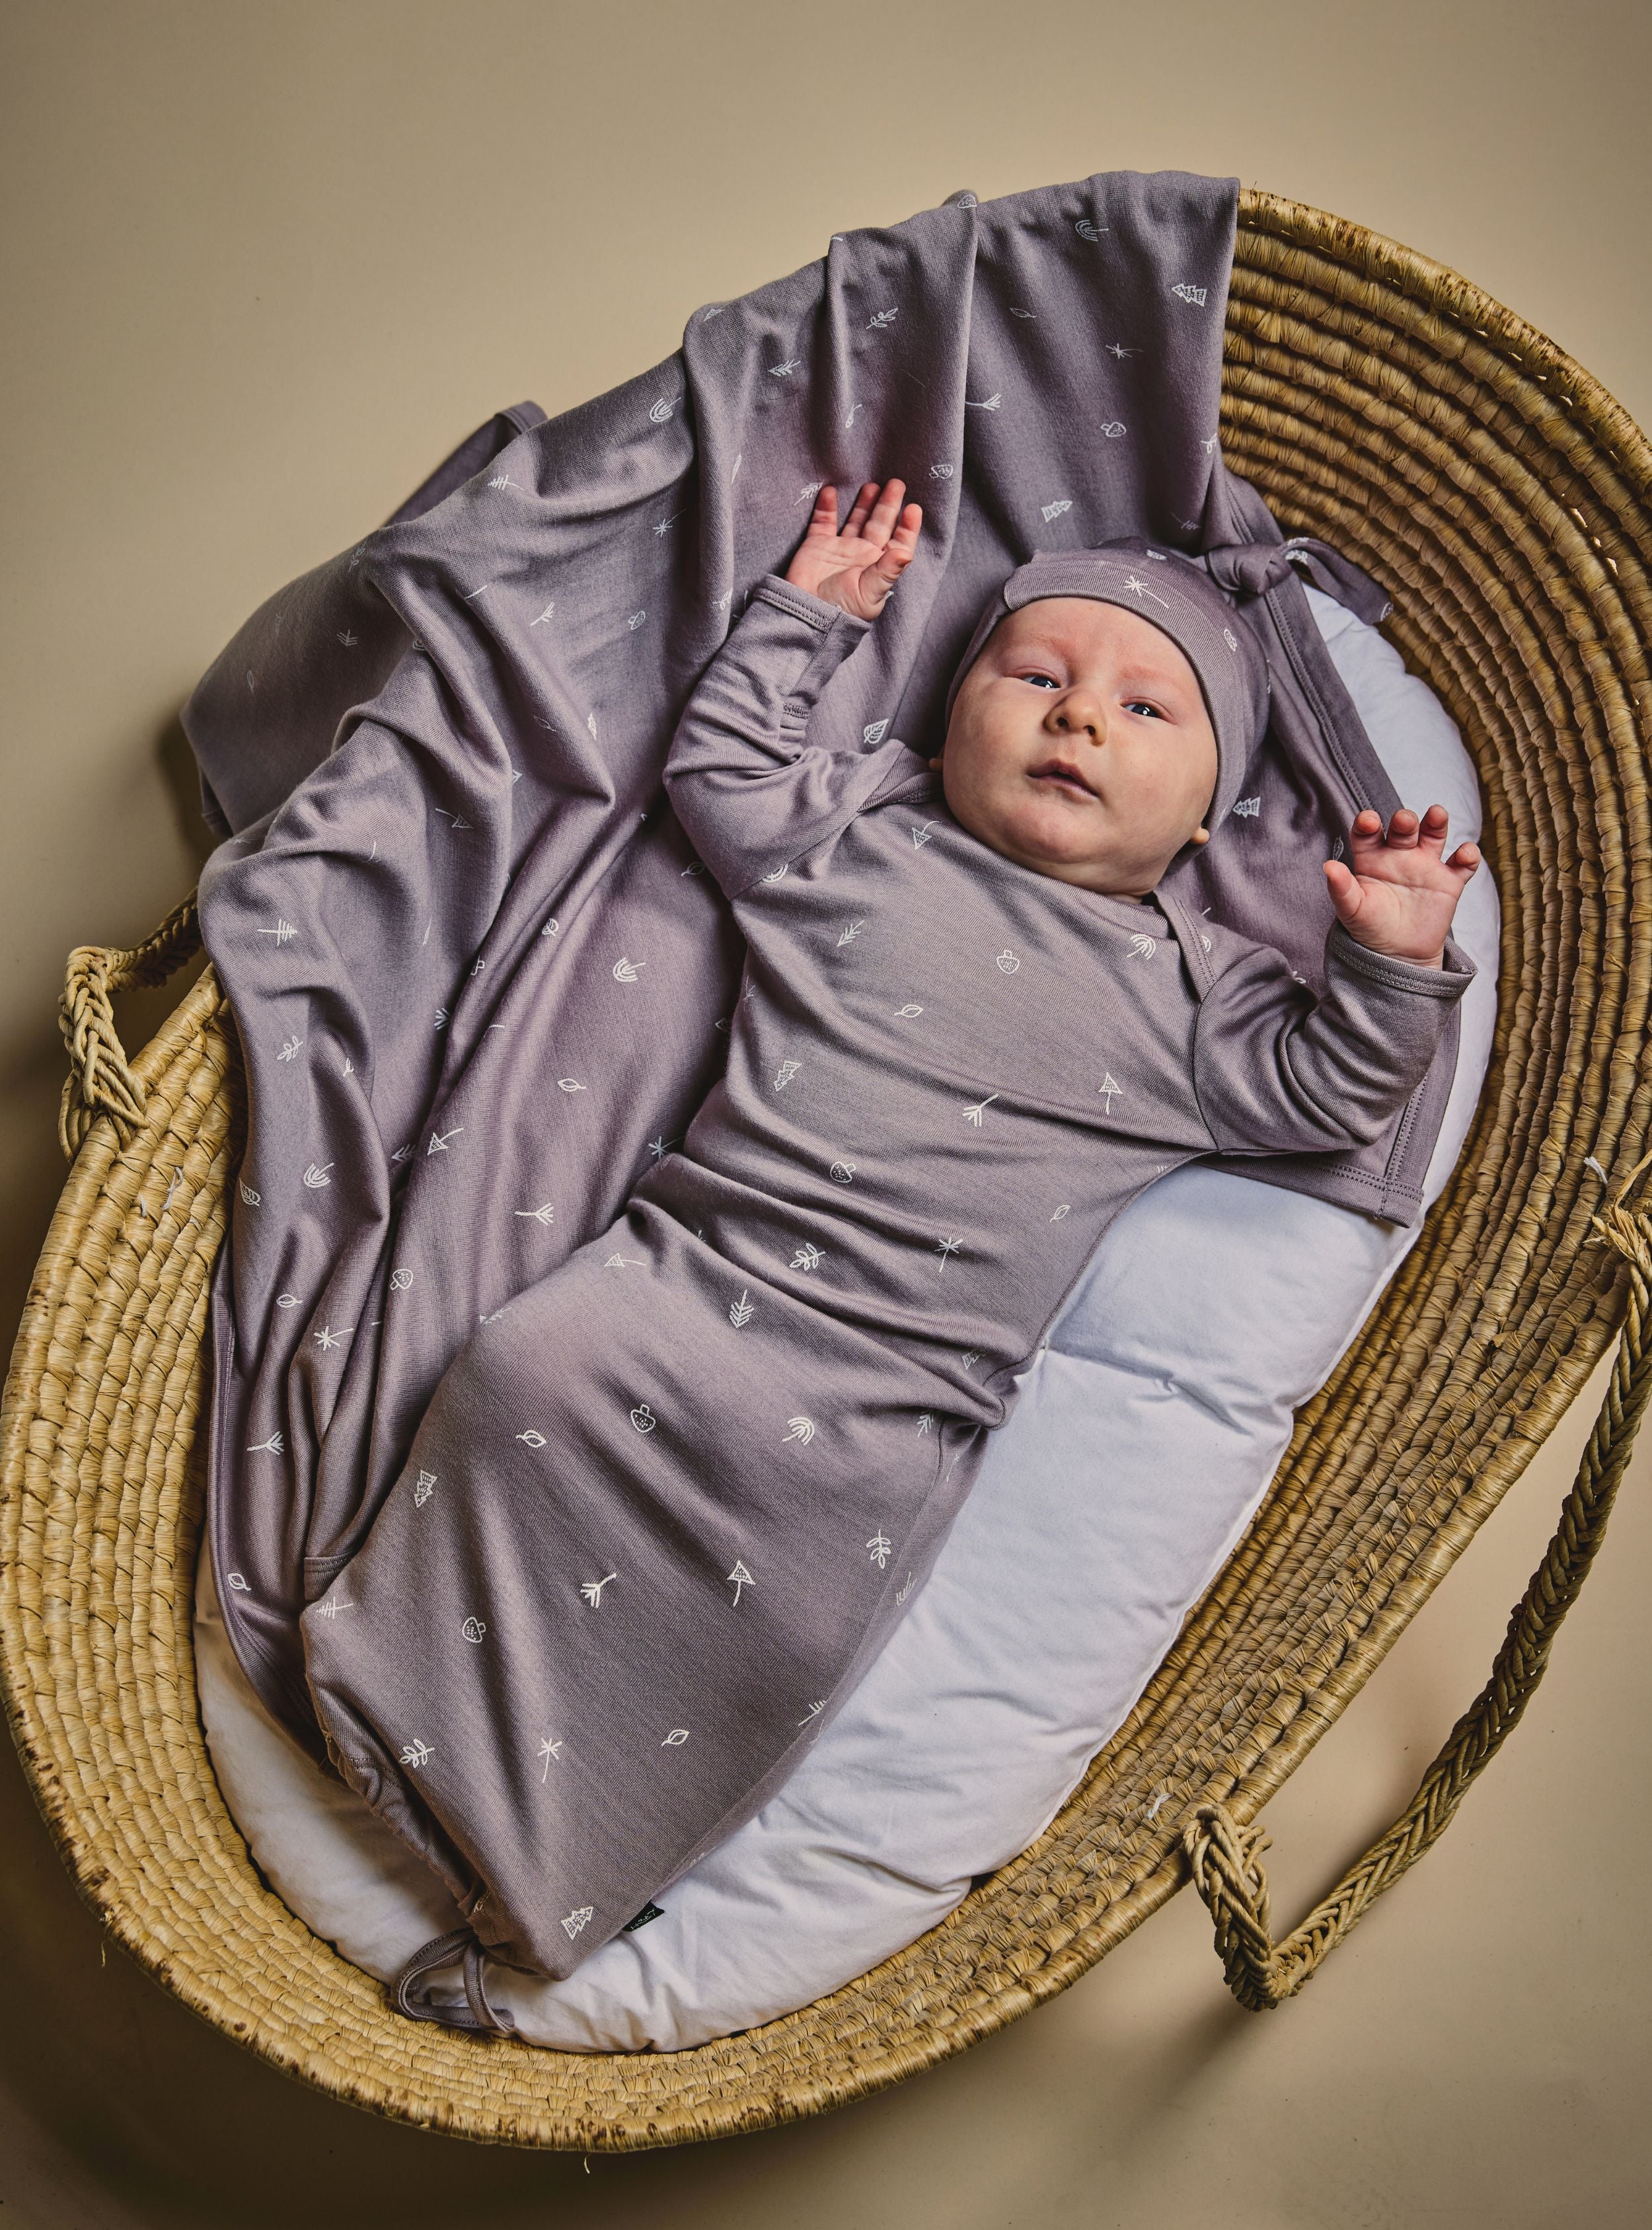 NEWCOMER BABY GOWN- Taupe Nature